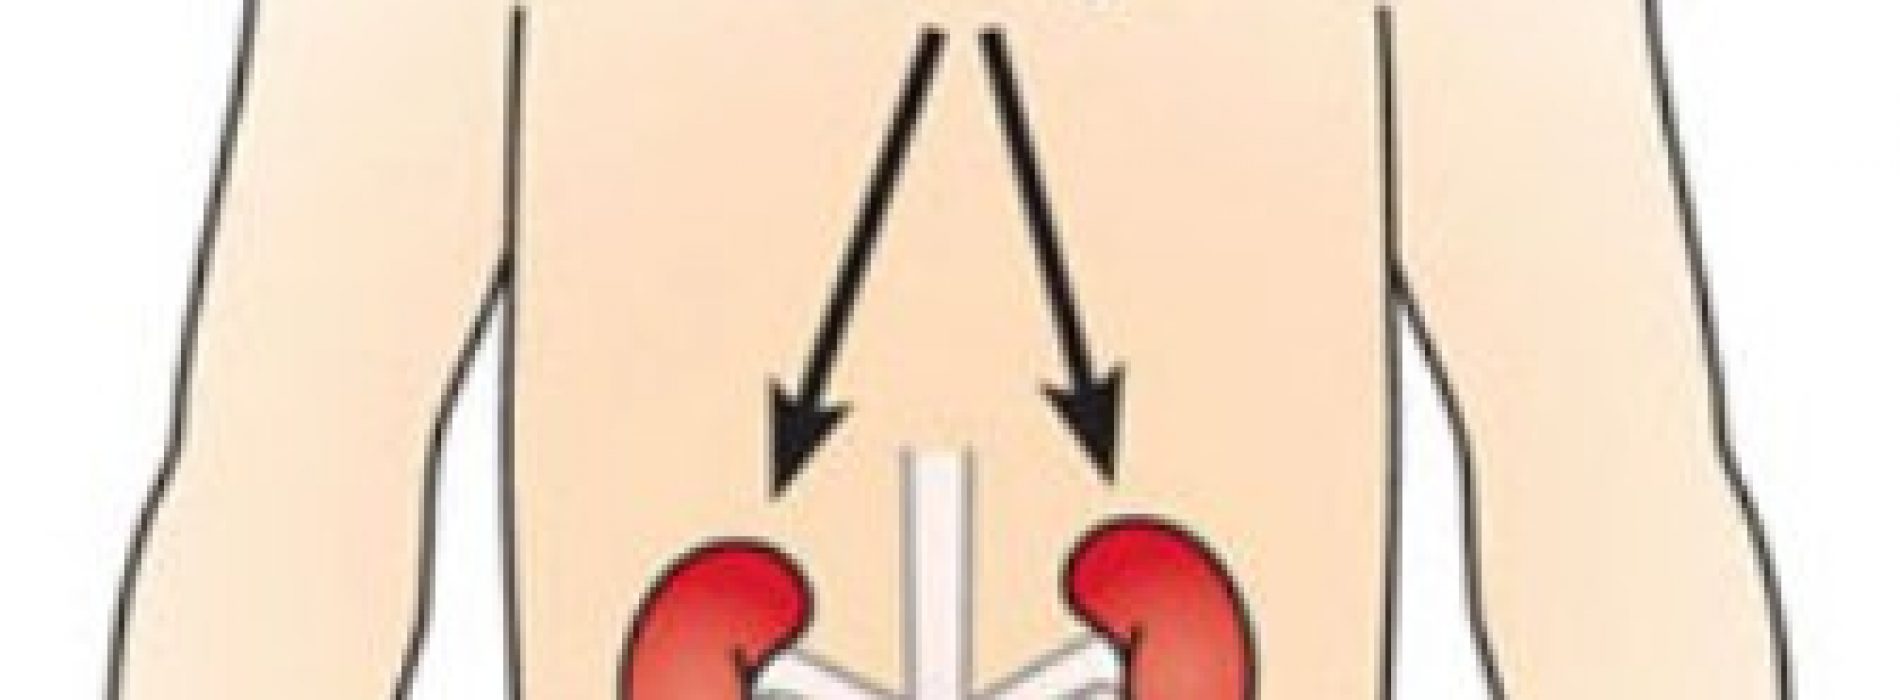 Analgesics and your kidney: Facts to know